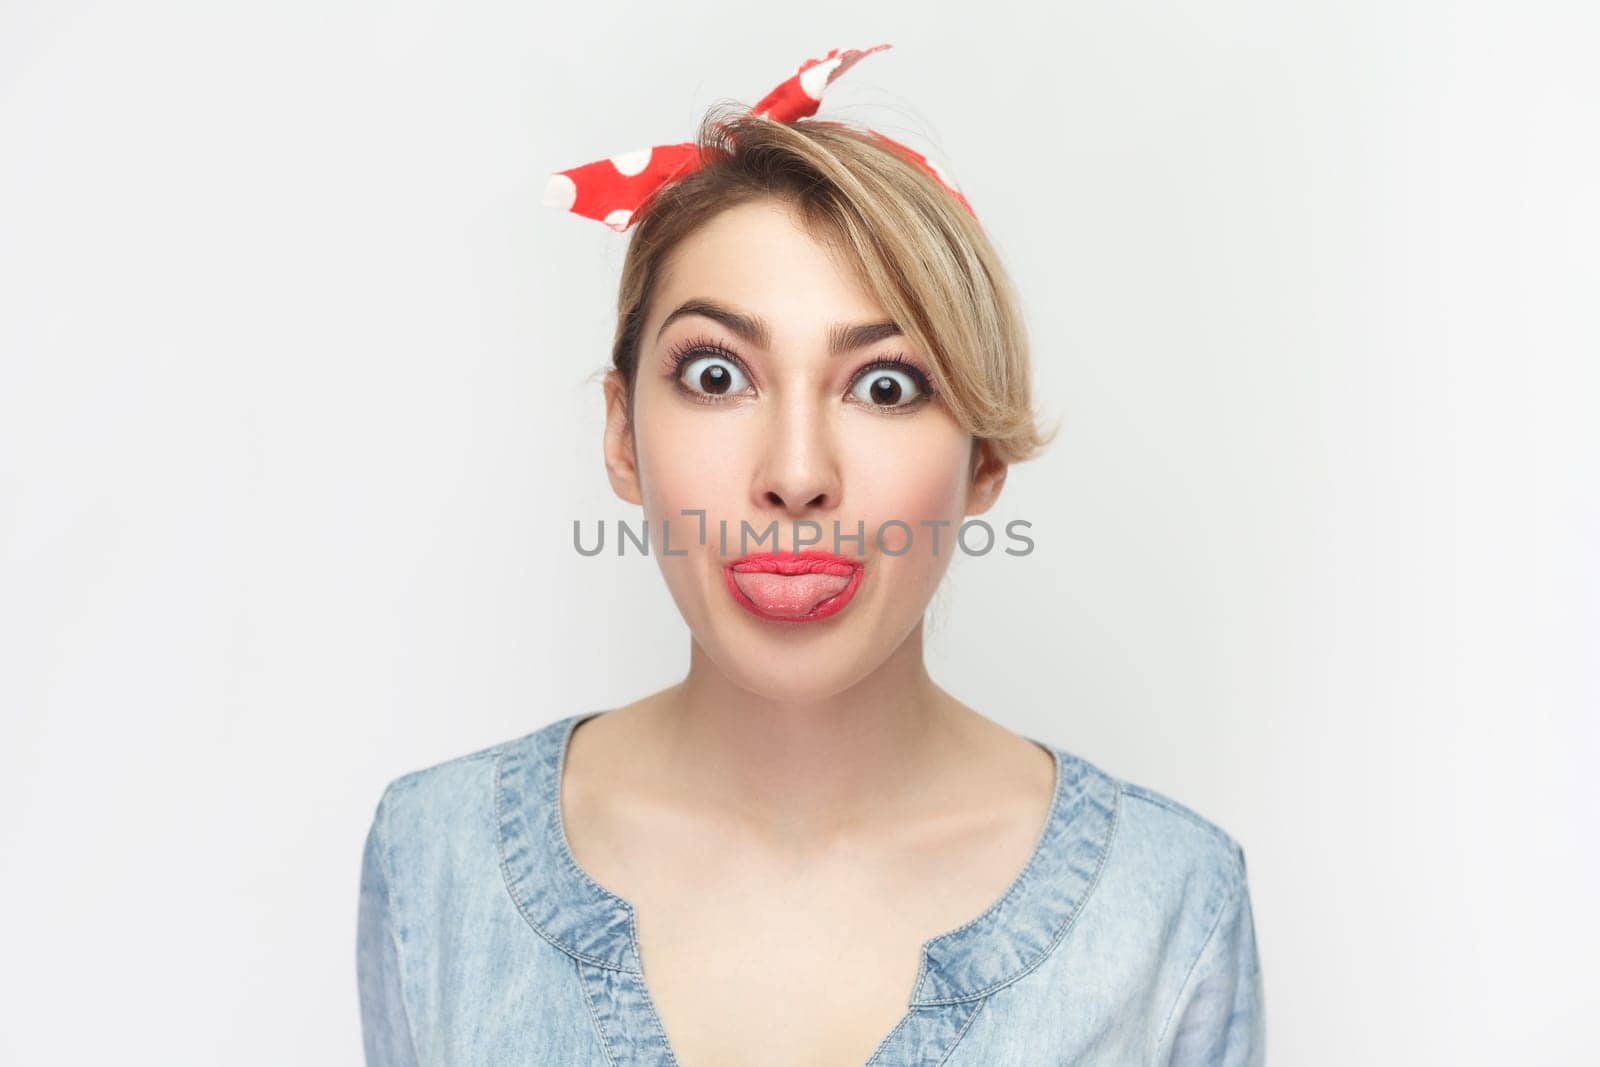 Portrait of funny crazy foolish blonde woman wearing blue denim shirt and red headband standing sticking tongue out, looking at camera. Indoor studio shot isolated on gray background.